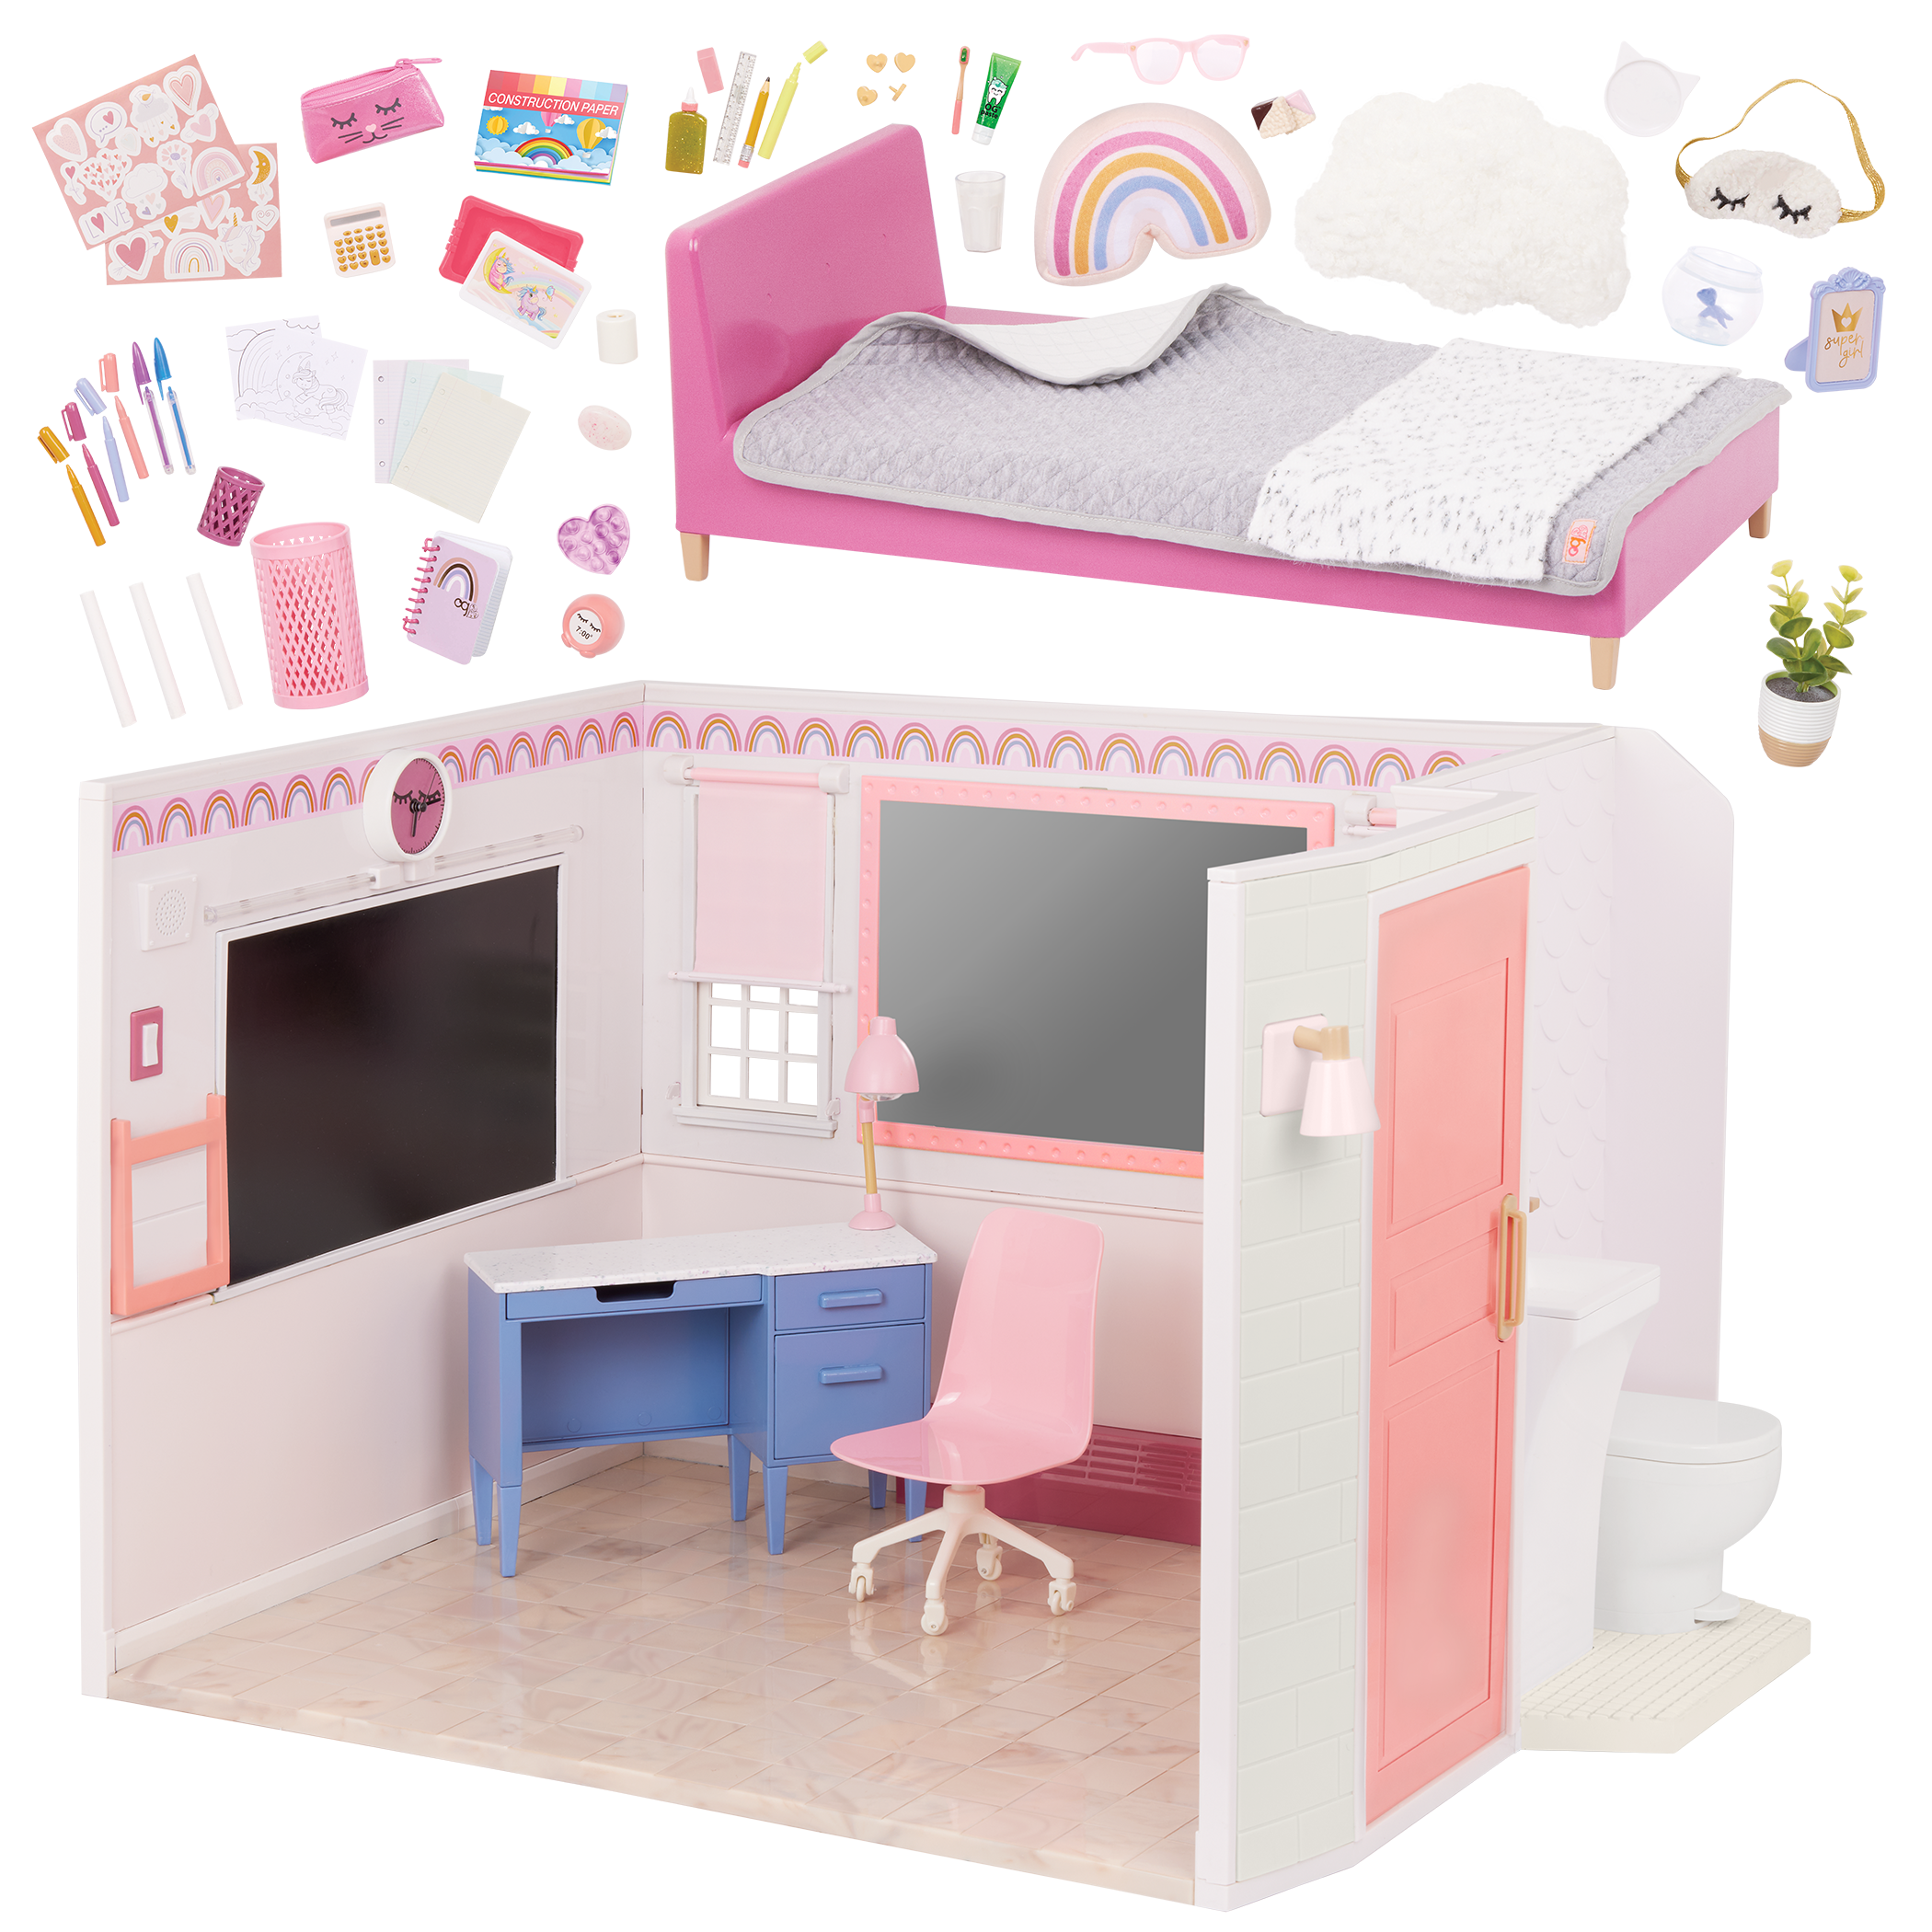 Our Generation Room to Dream Bedroom Playset for 18-inch Dolls 